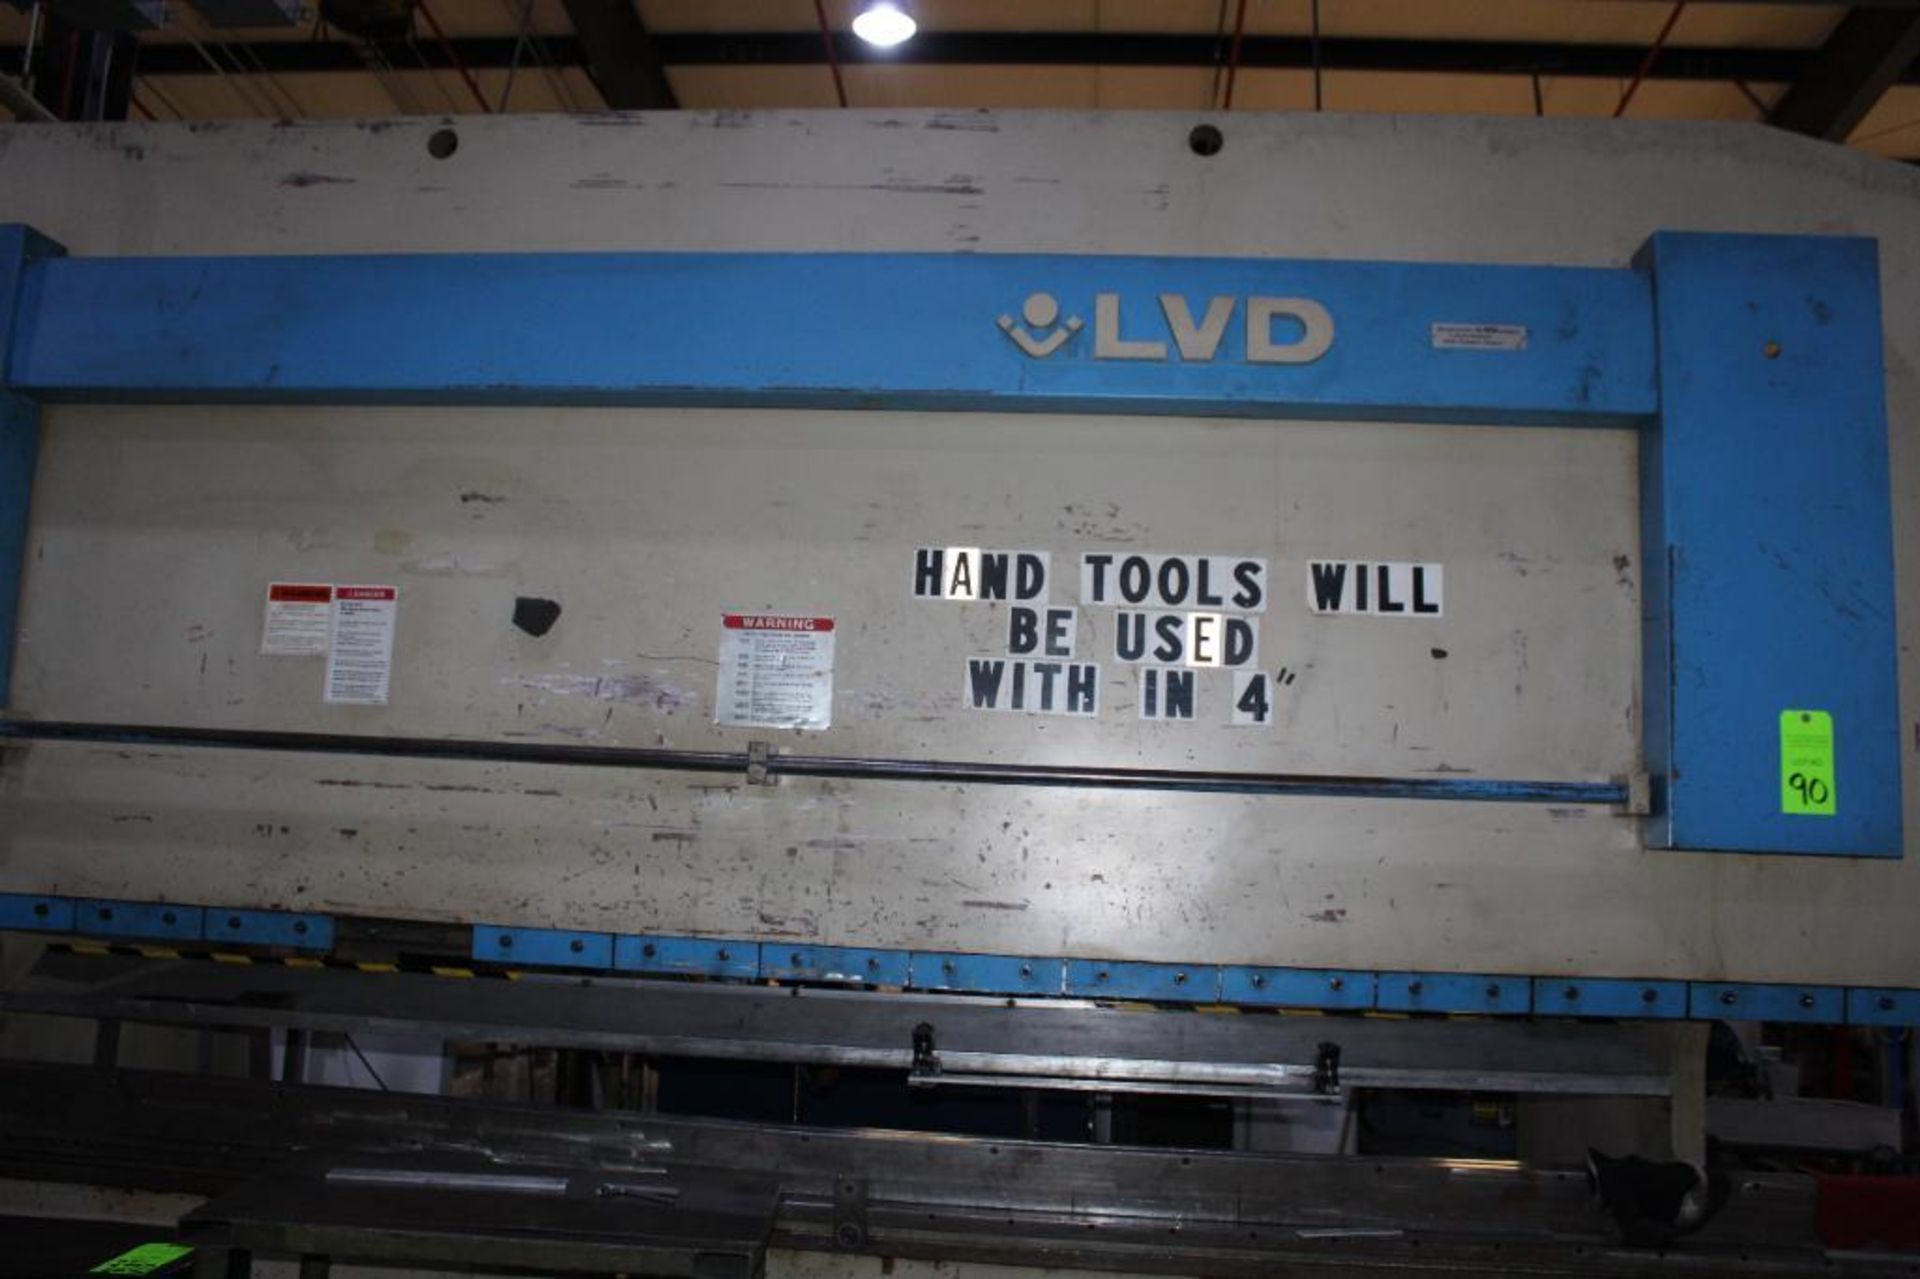 1995 LVD Hydraulic Press Brake Model 180JS13 Equipped With Hurco AutoBend 7 CNC Back Gage - Image 3 of 22